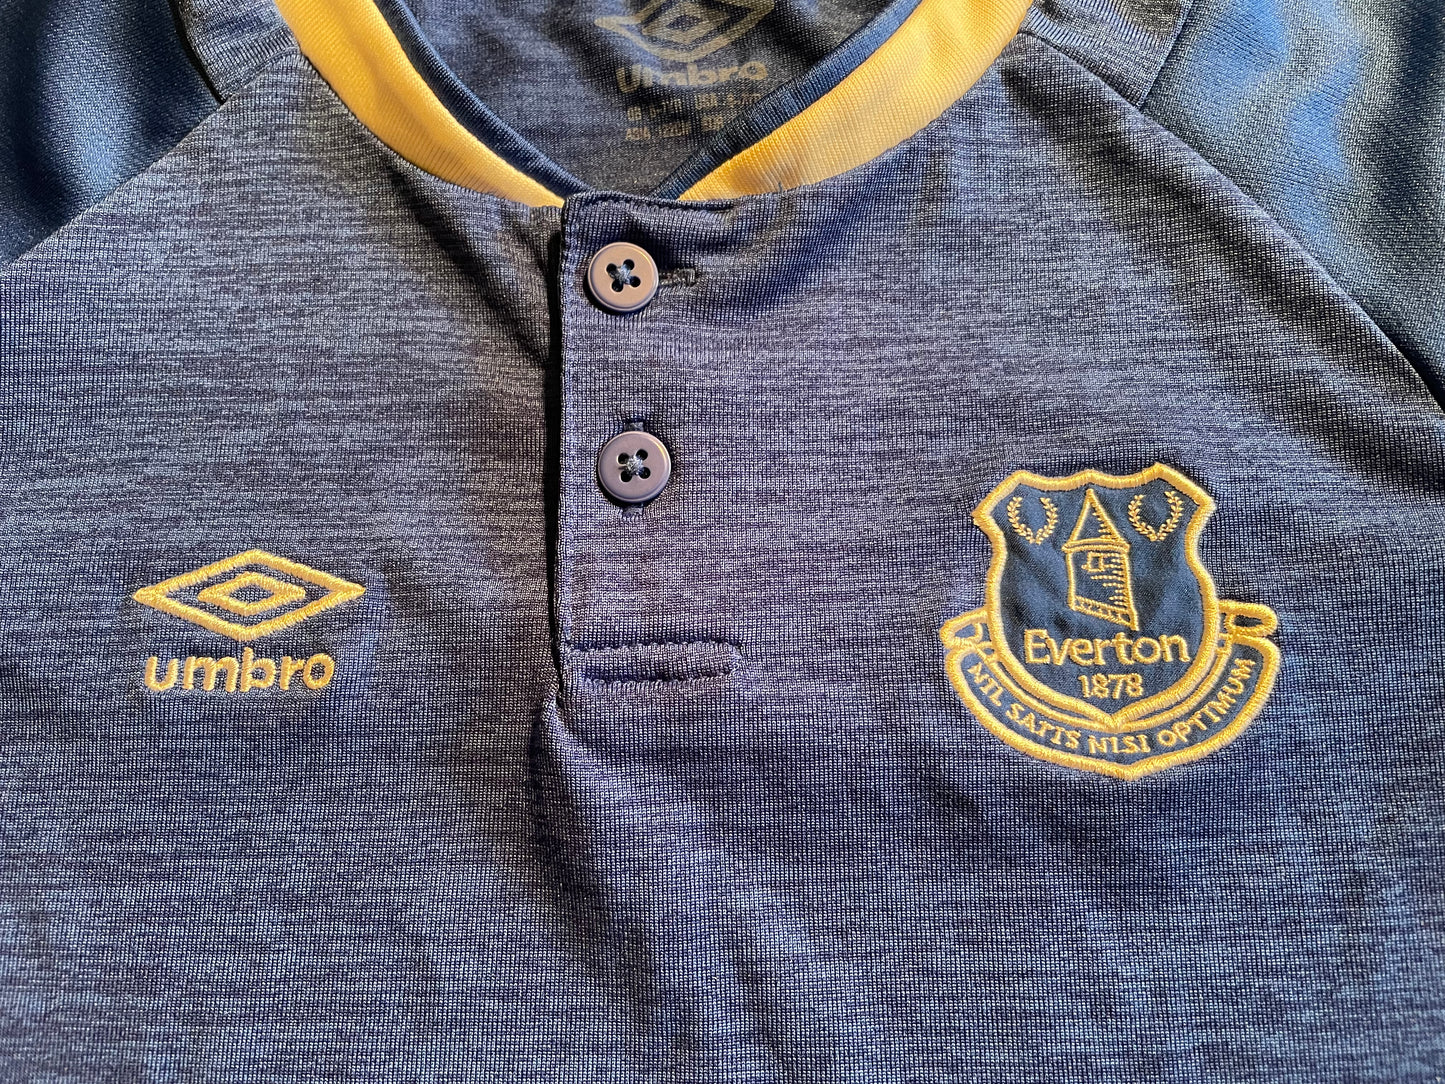 Everton 2018 Home Shirt (excellent) Ages 6 to 7. Height 15 inches